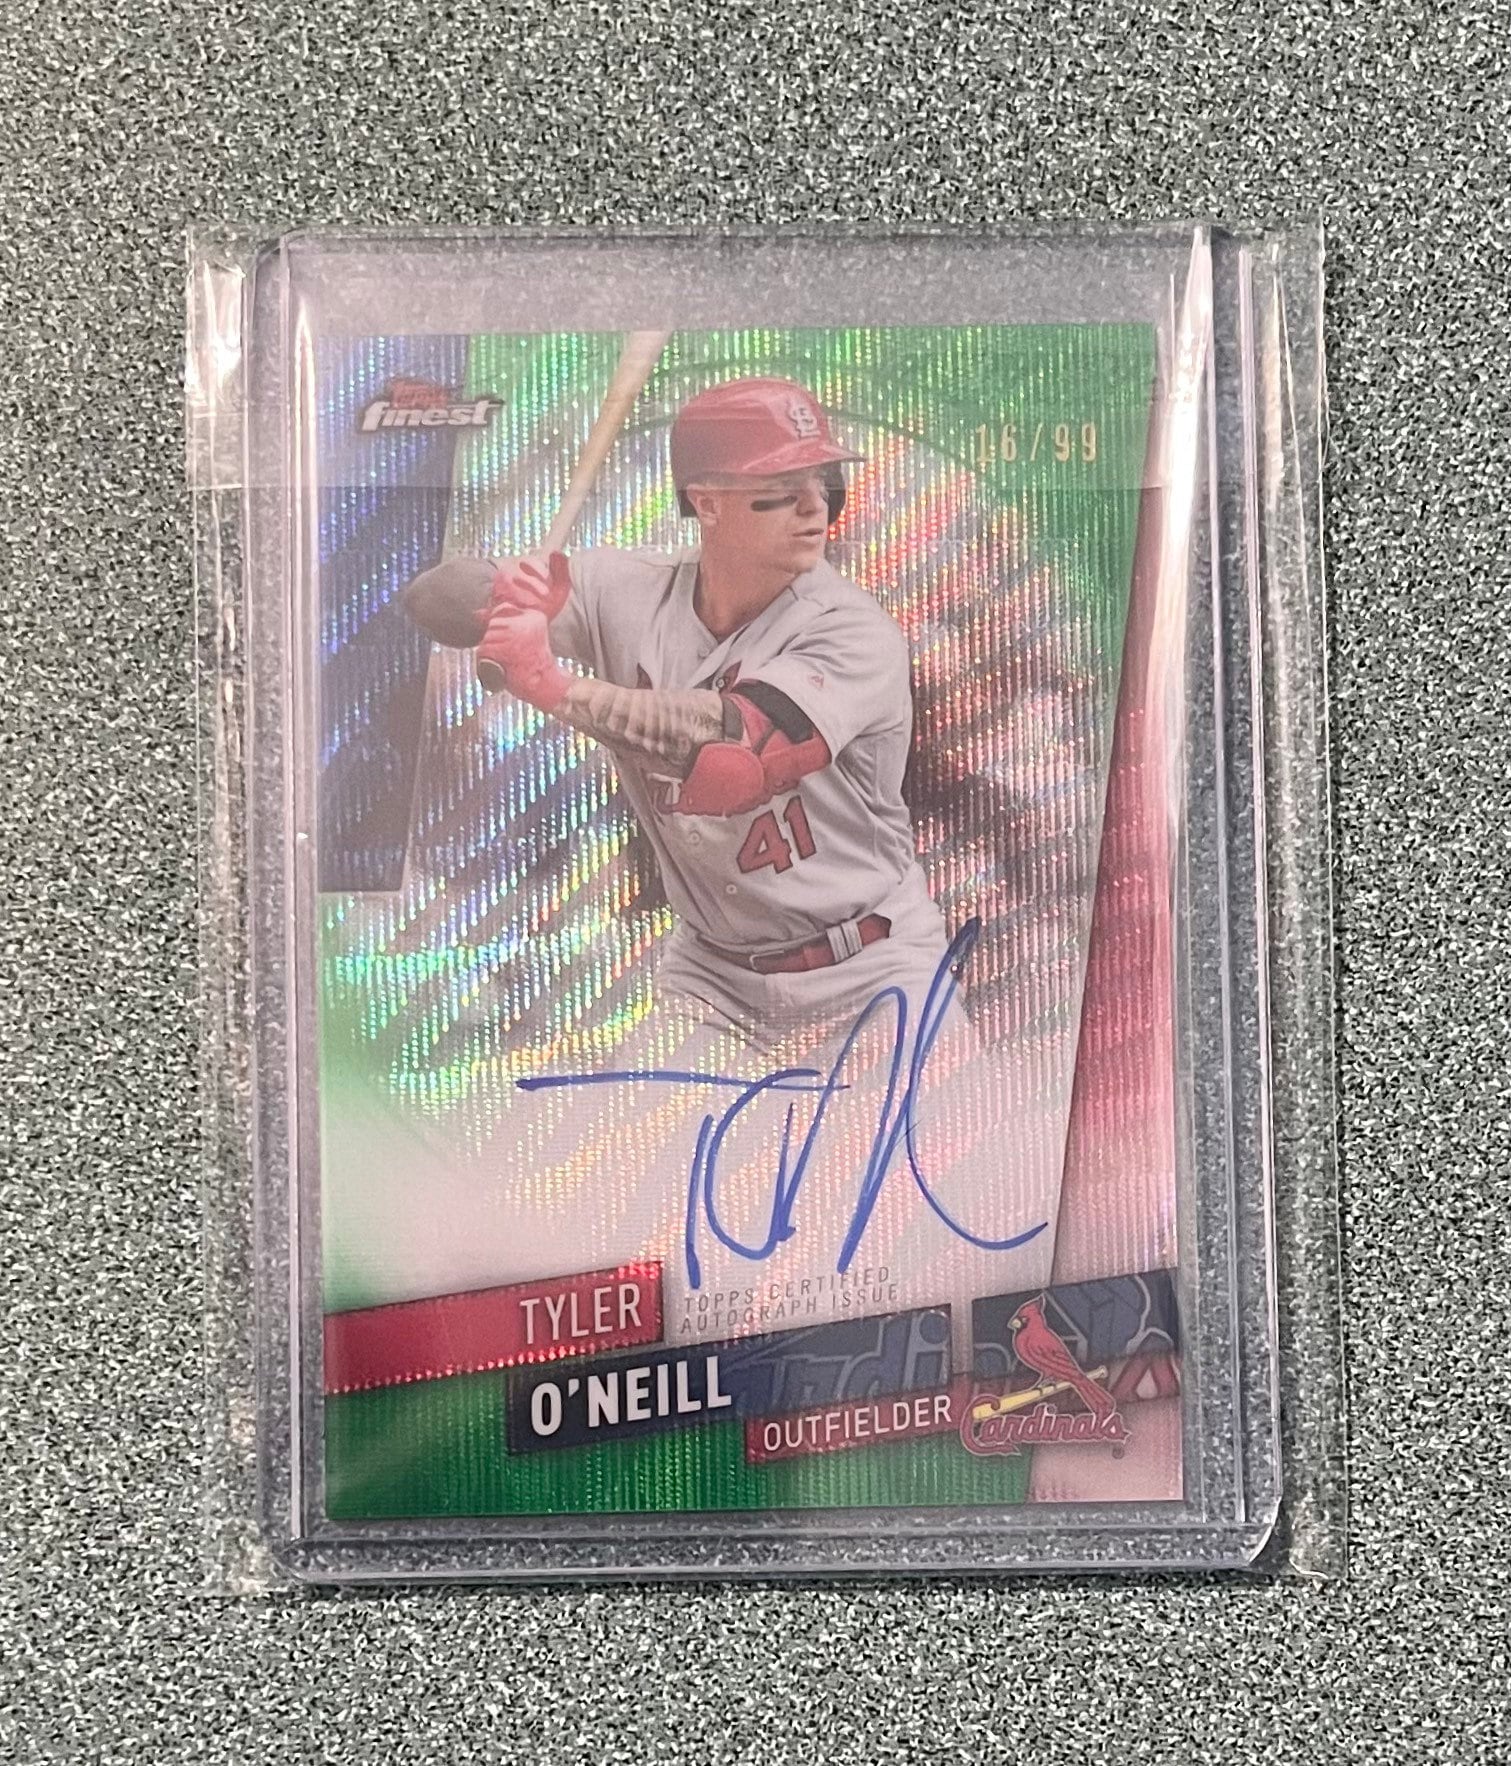 2019 Topps Finest Auto Green Wave Refractor 16/99 Tyler Etsy